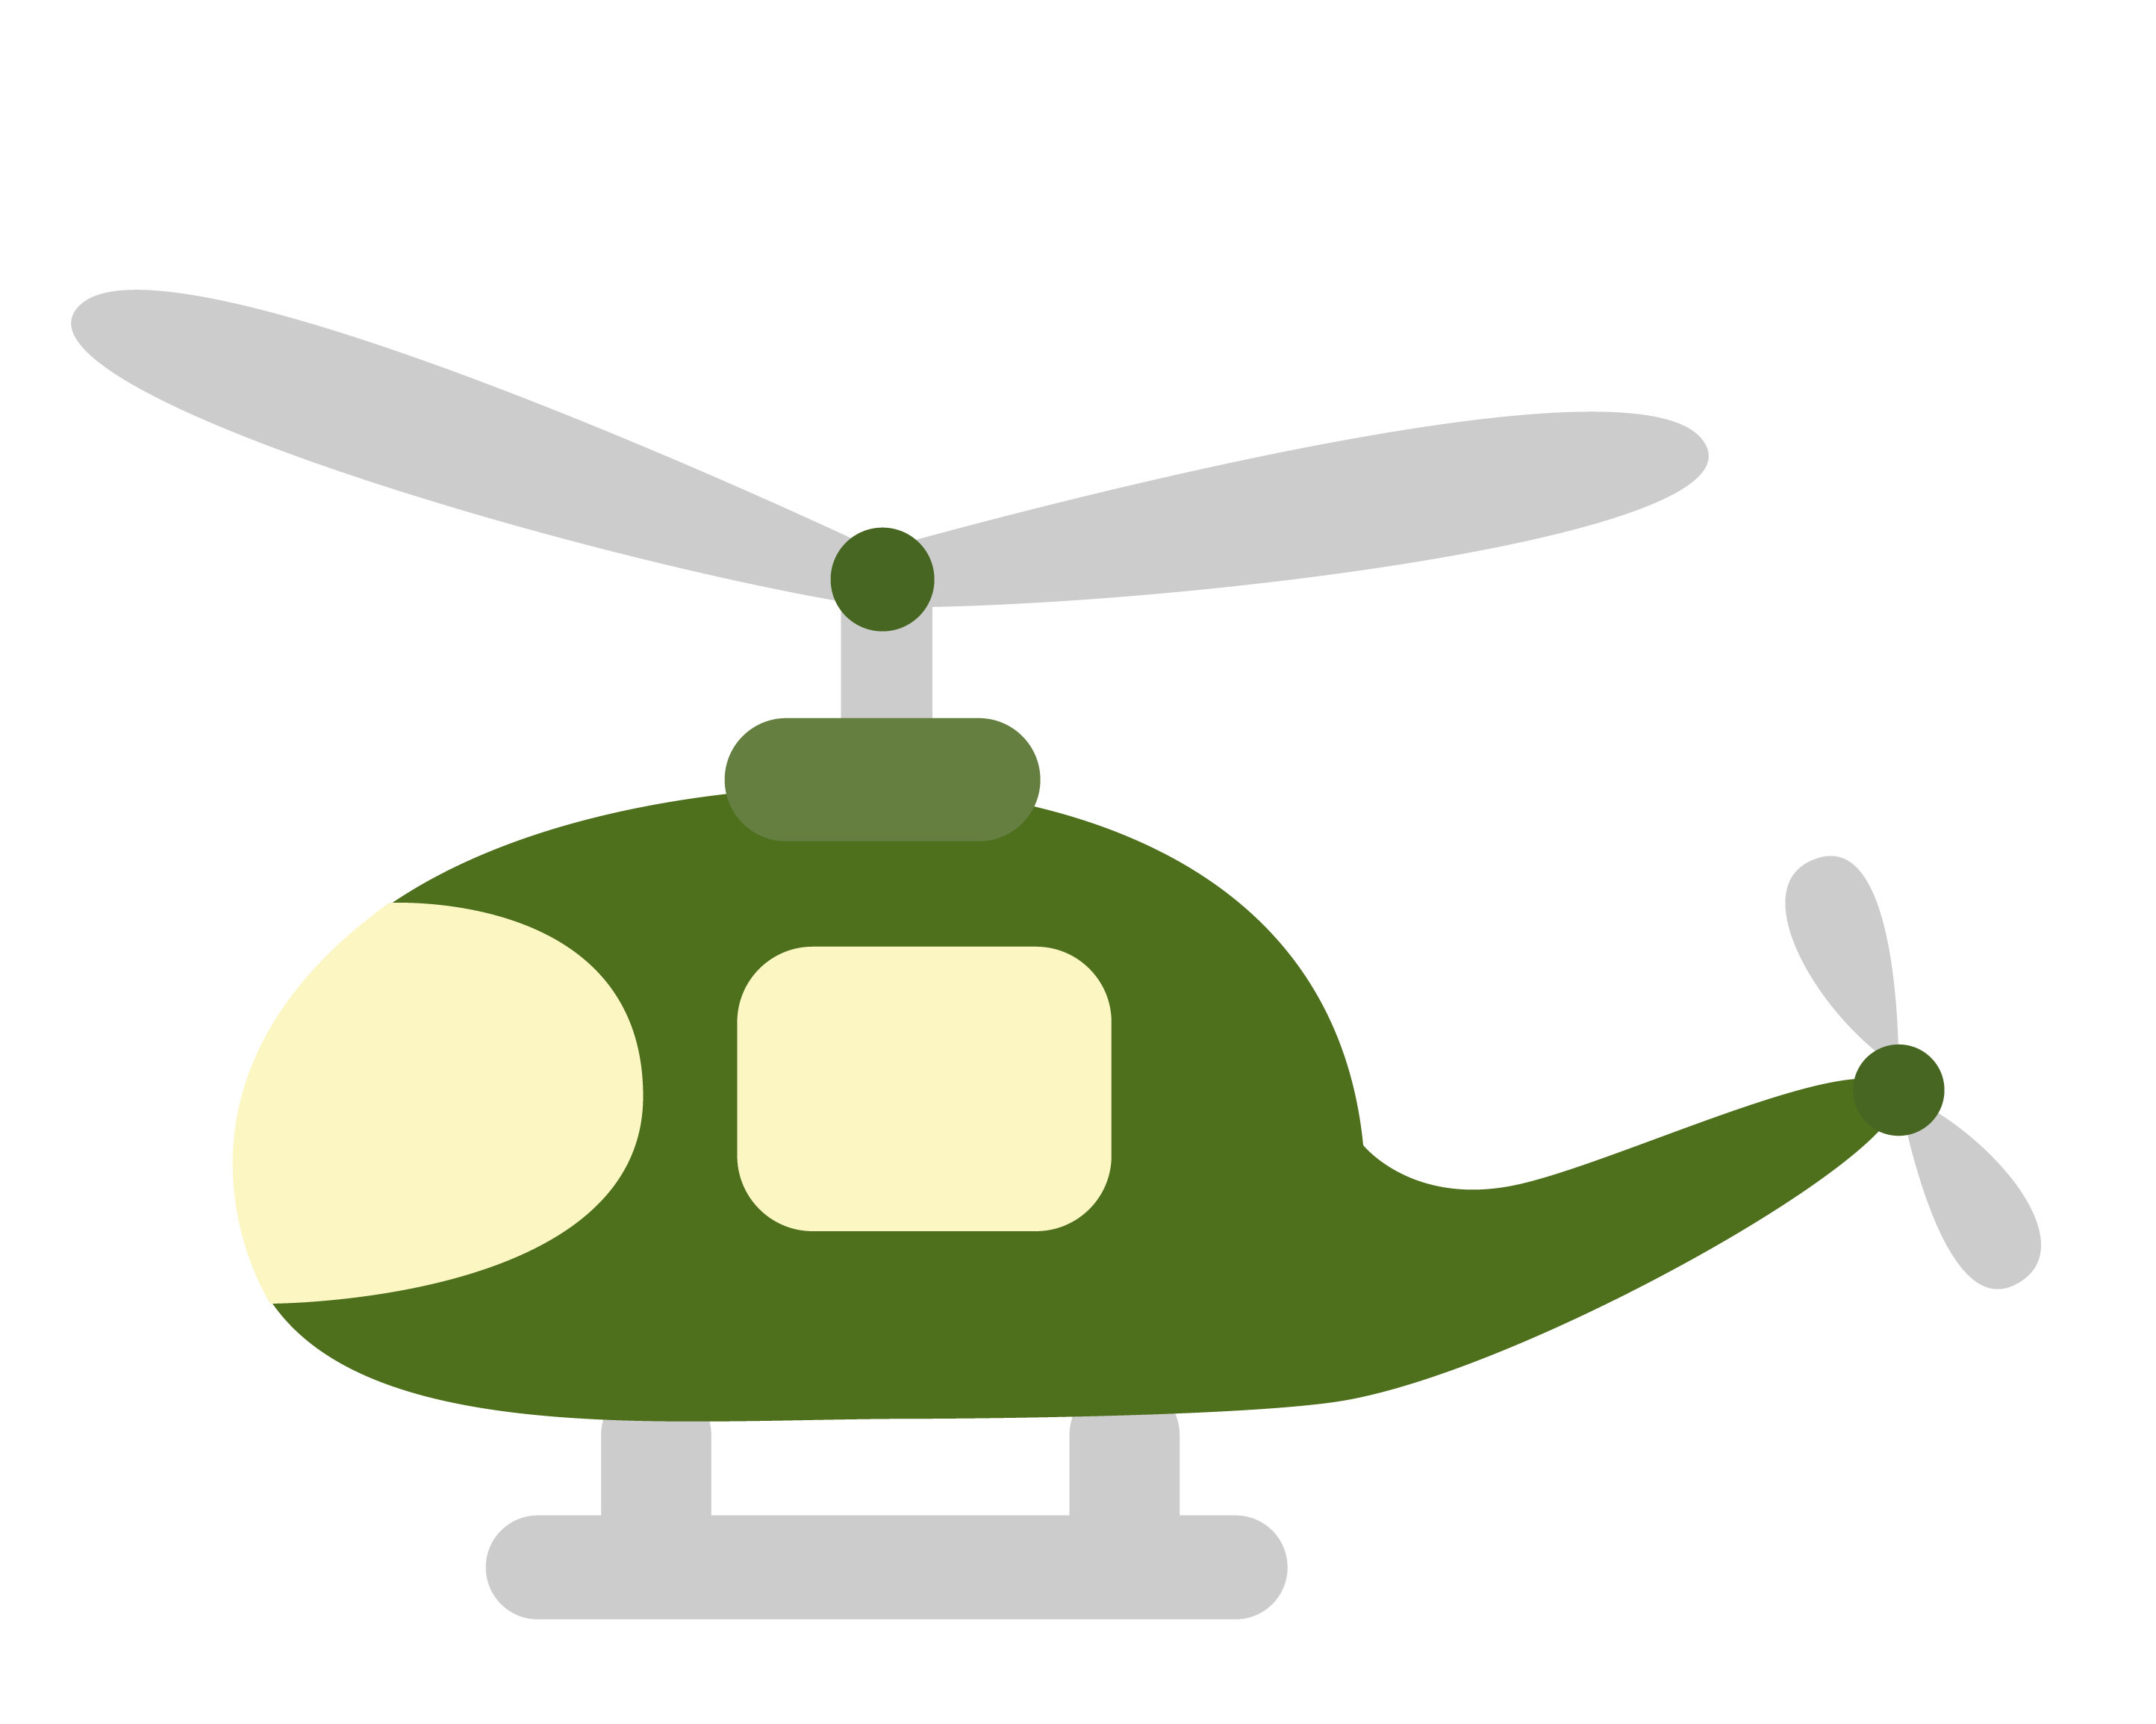 military clipart themed